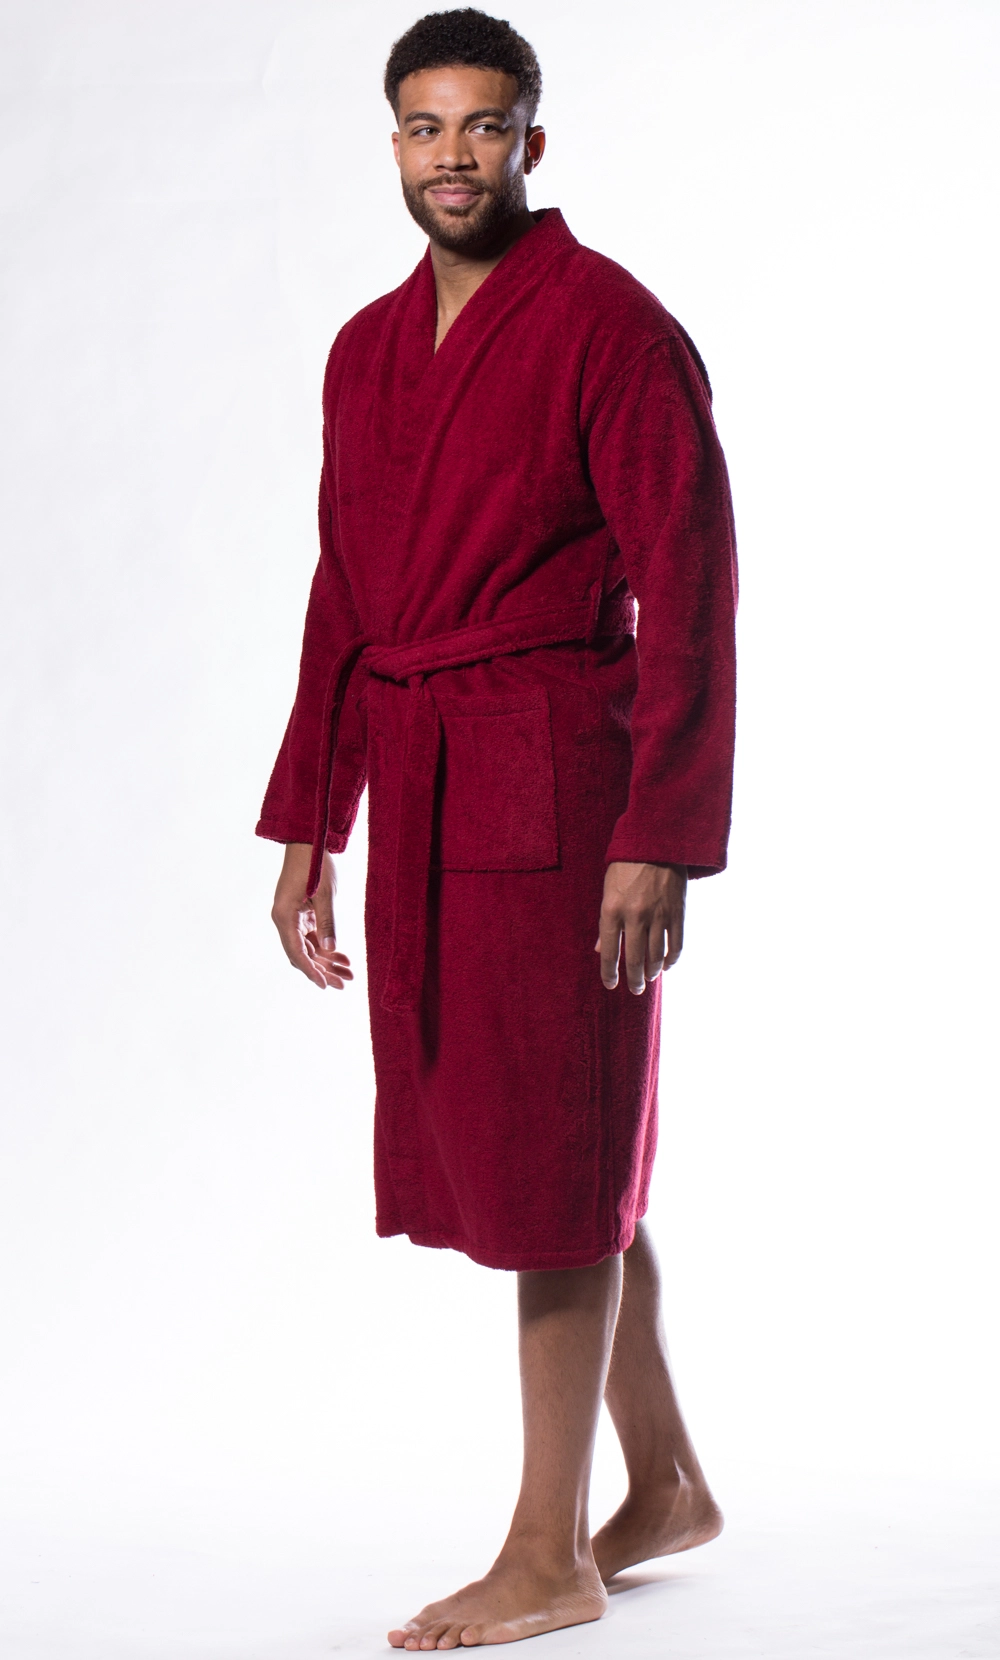 Men's Jersey Knit French Terry Robe